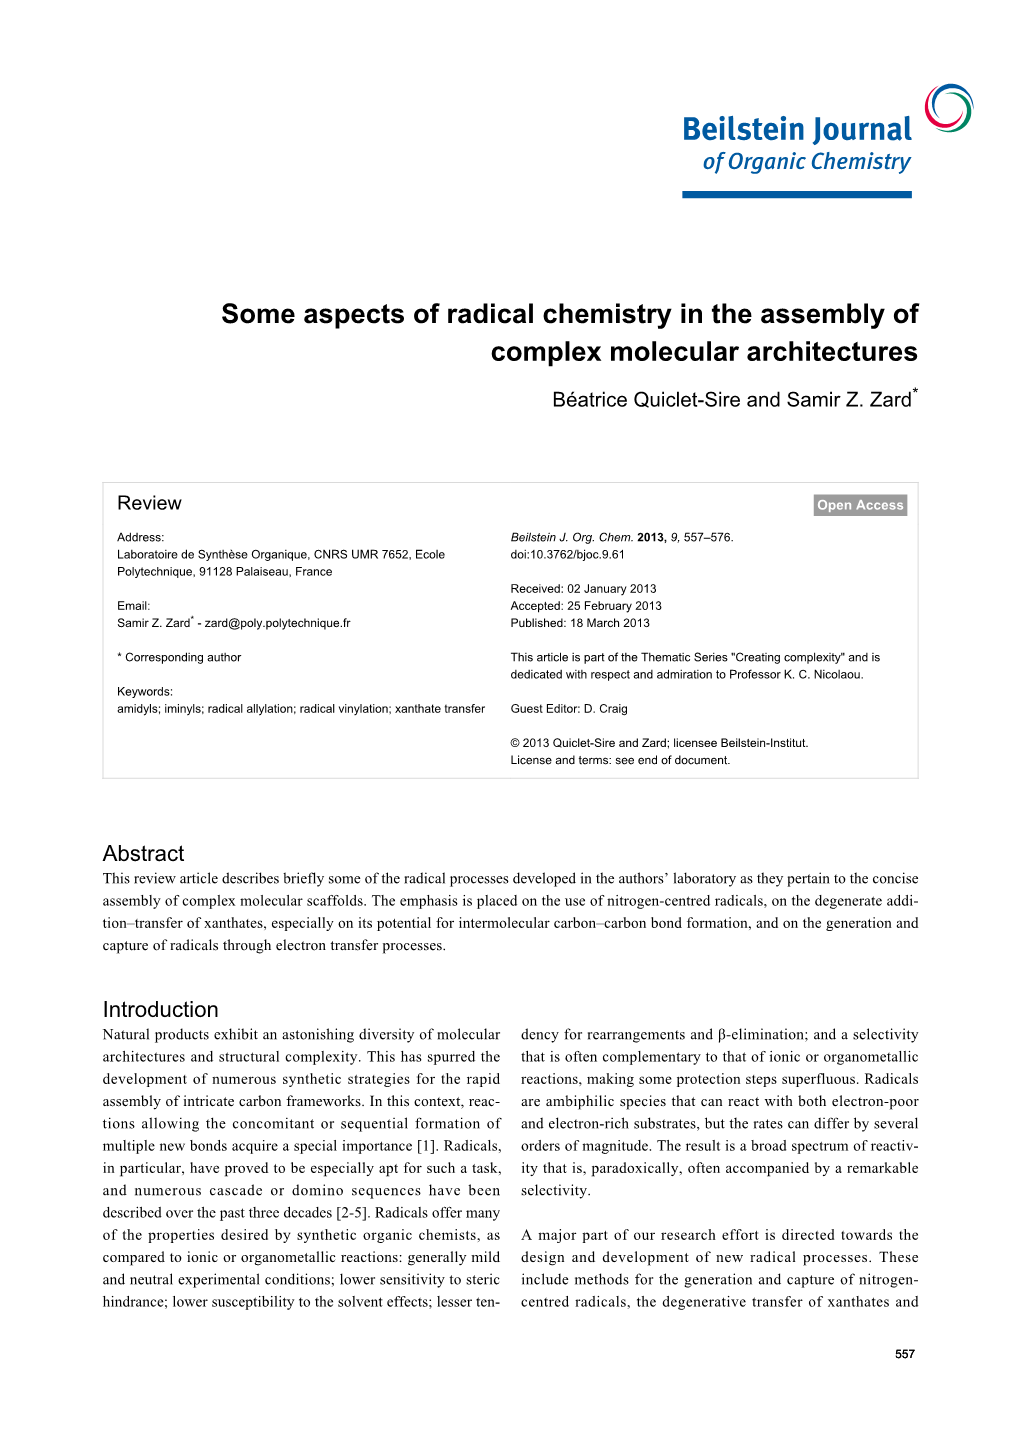 Some Aspects of Radical Chemistry in the Assembly of Complex Molecular Architectures